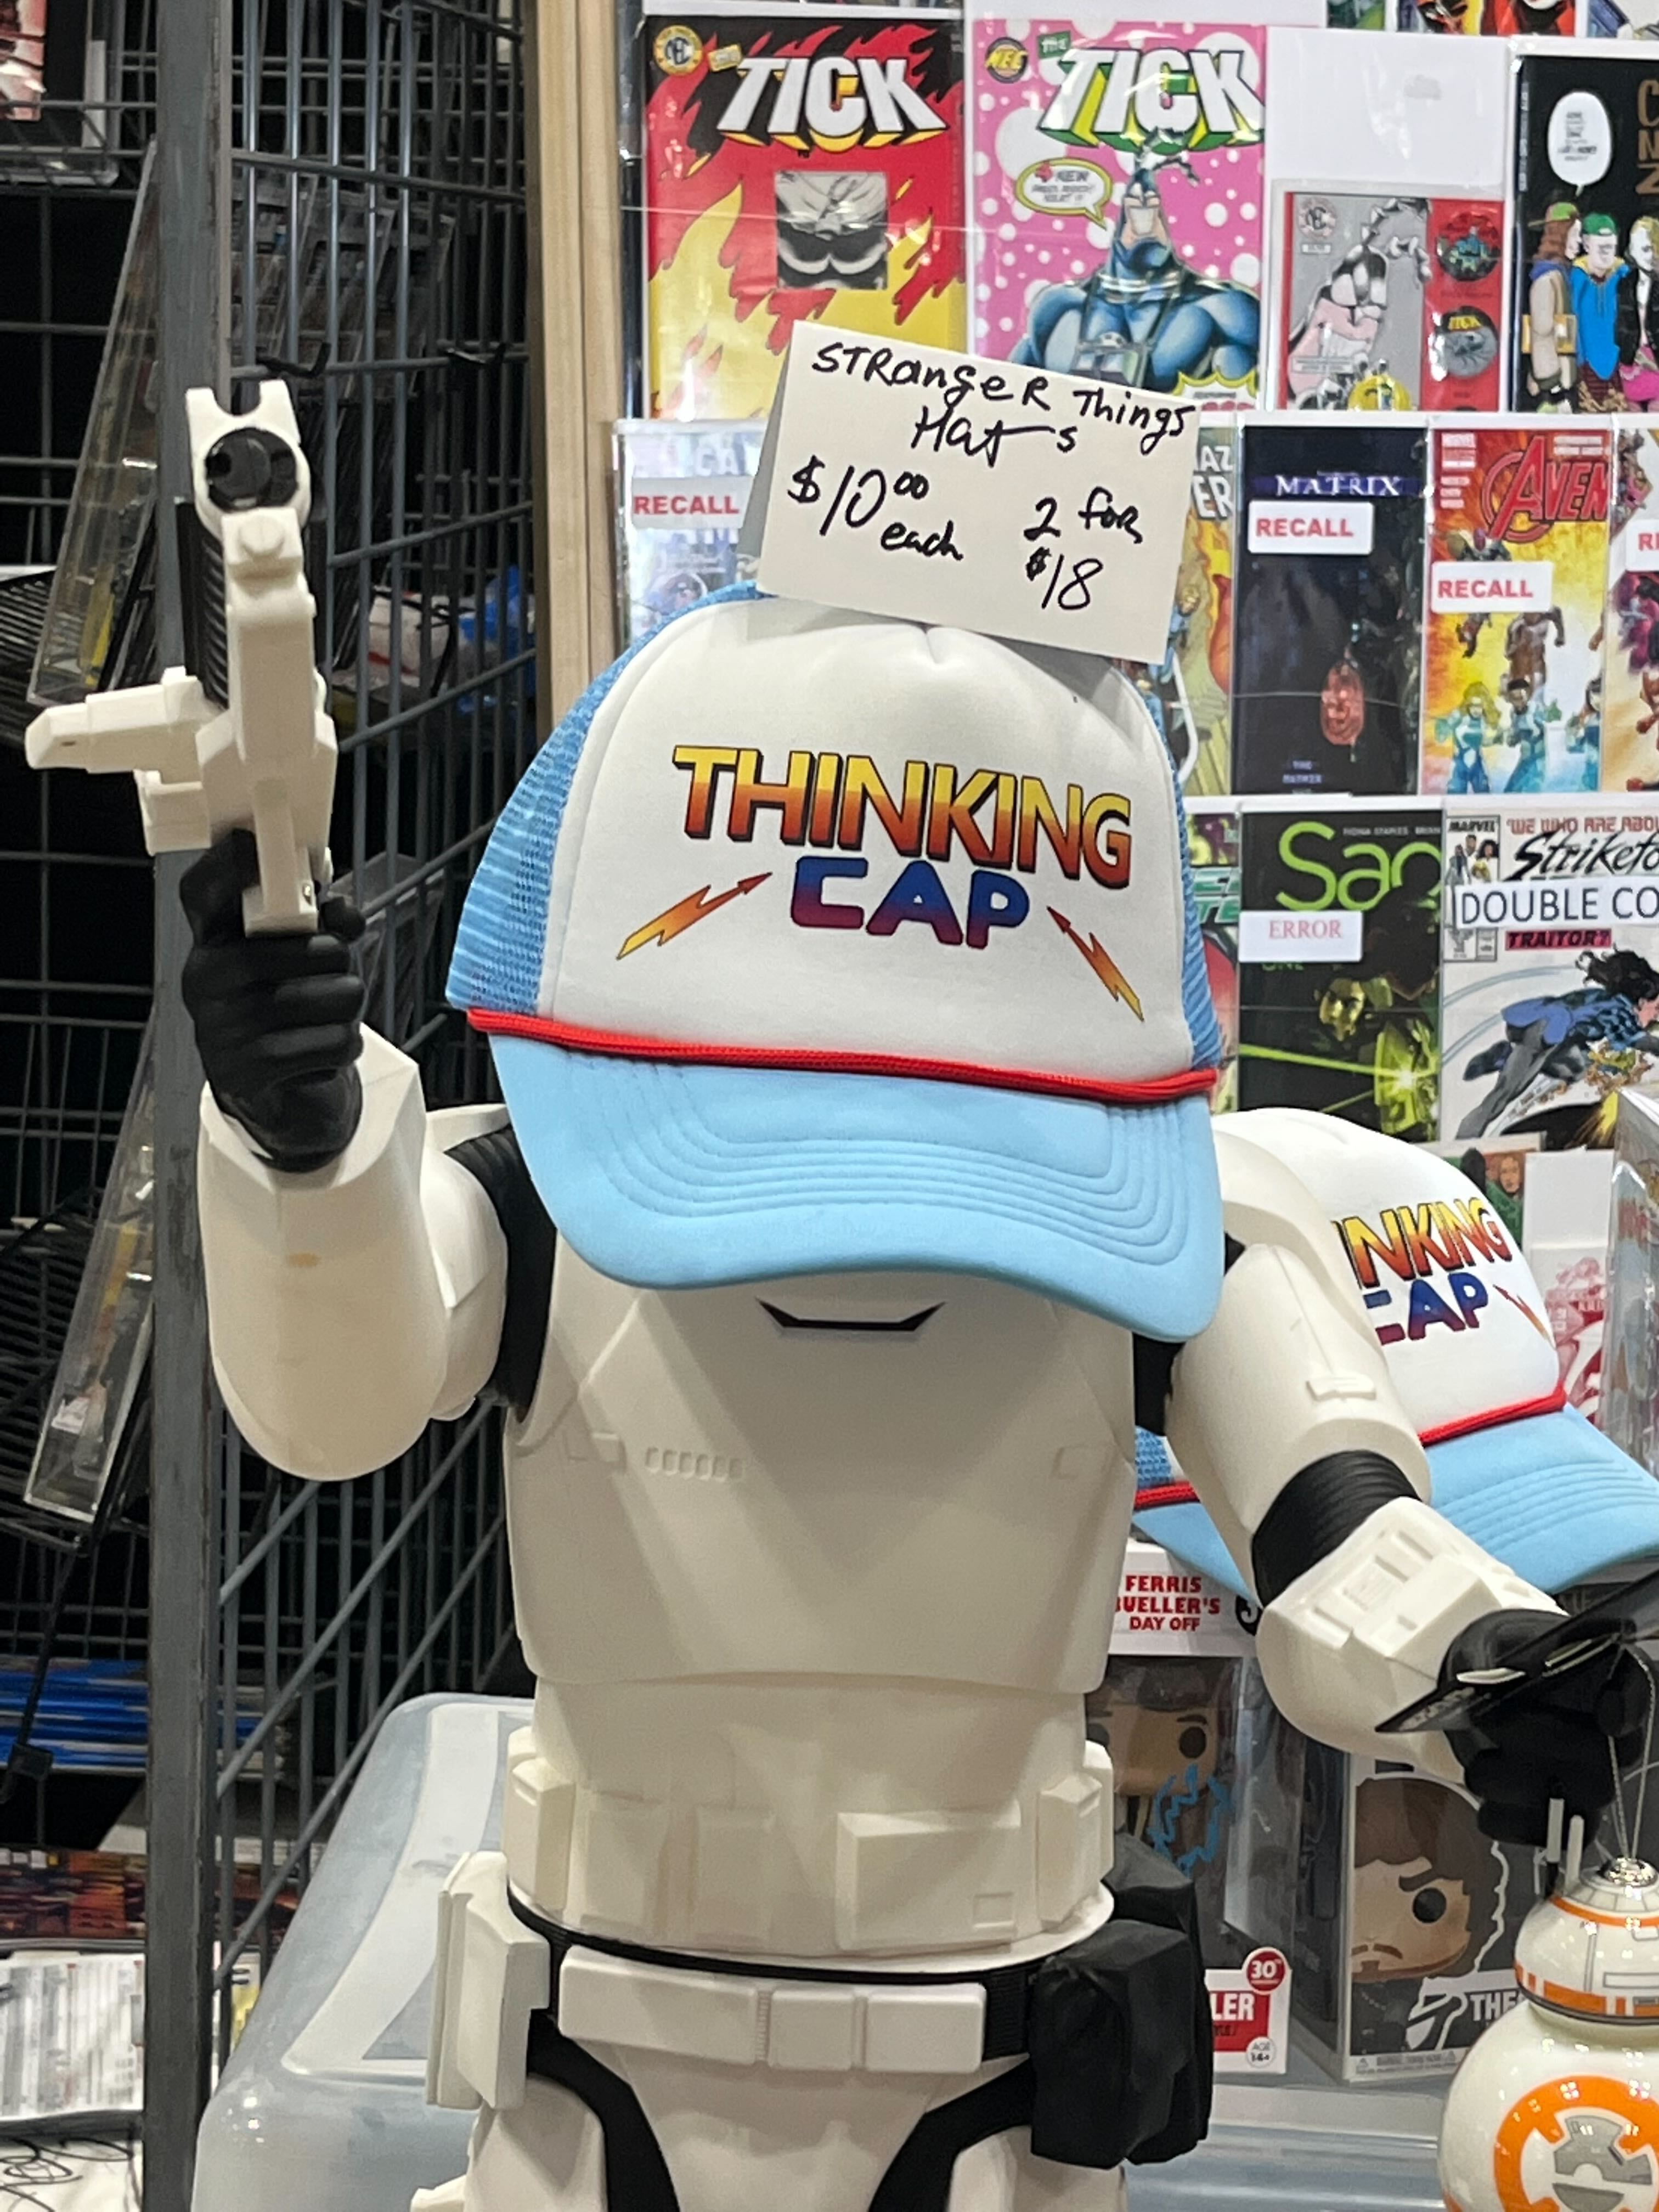 Things you can buy at comic con - costume - Ticktick Recall Stranger Hat Things $10 2 for $18 each Thinking Cap